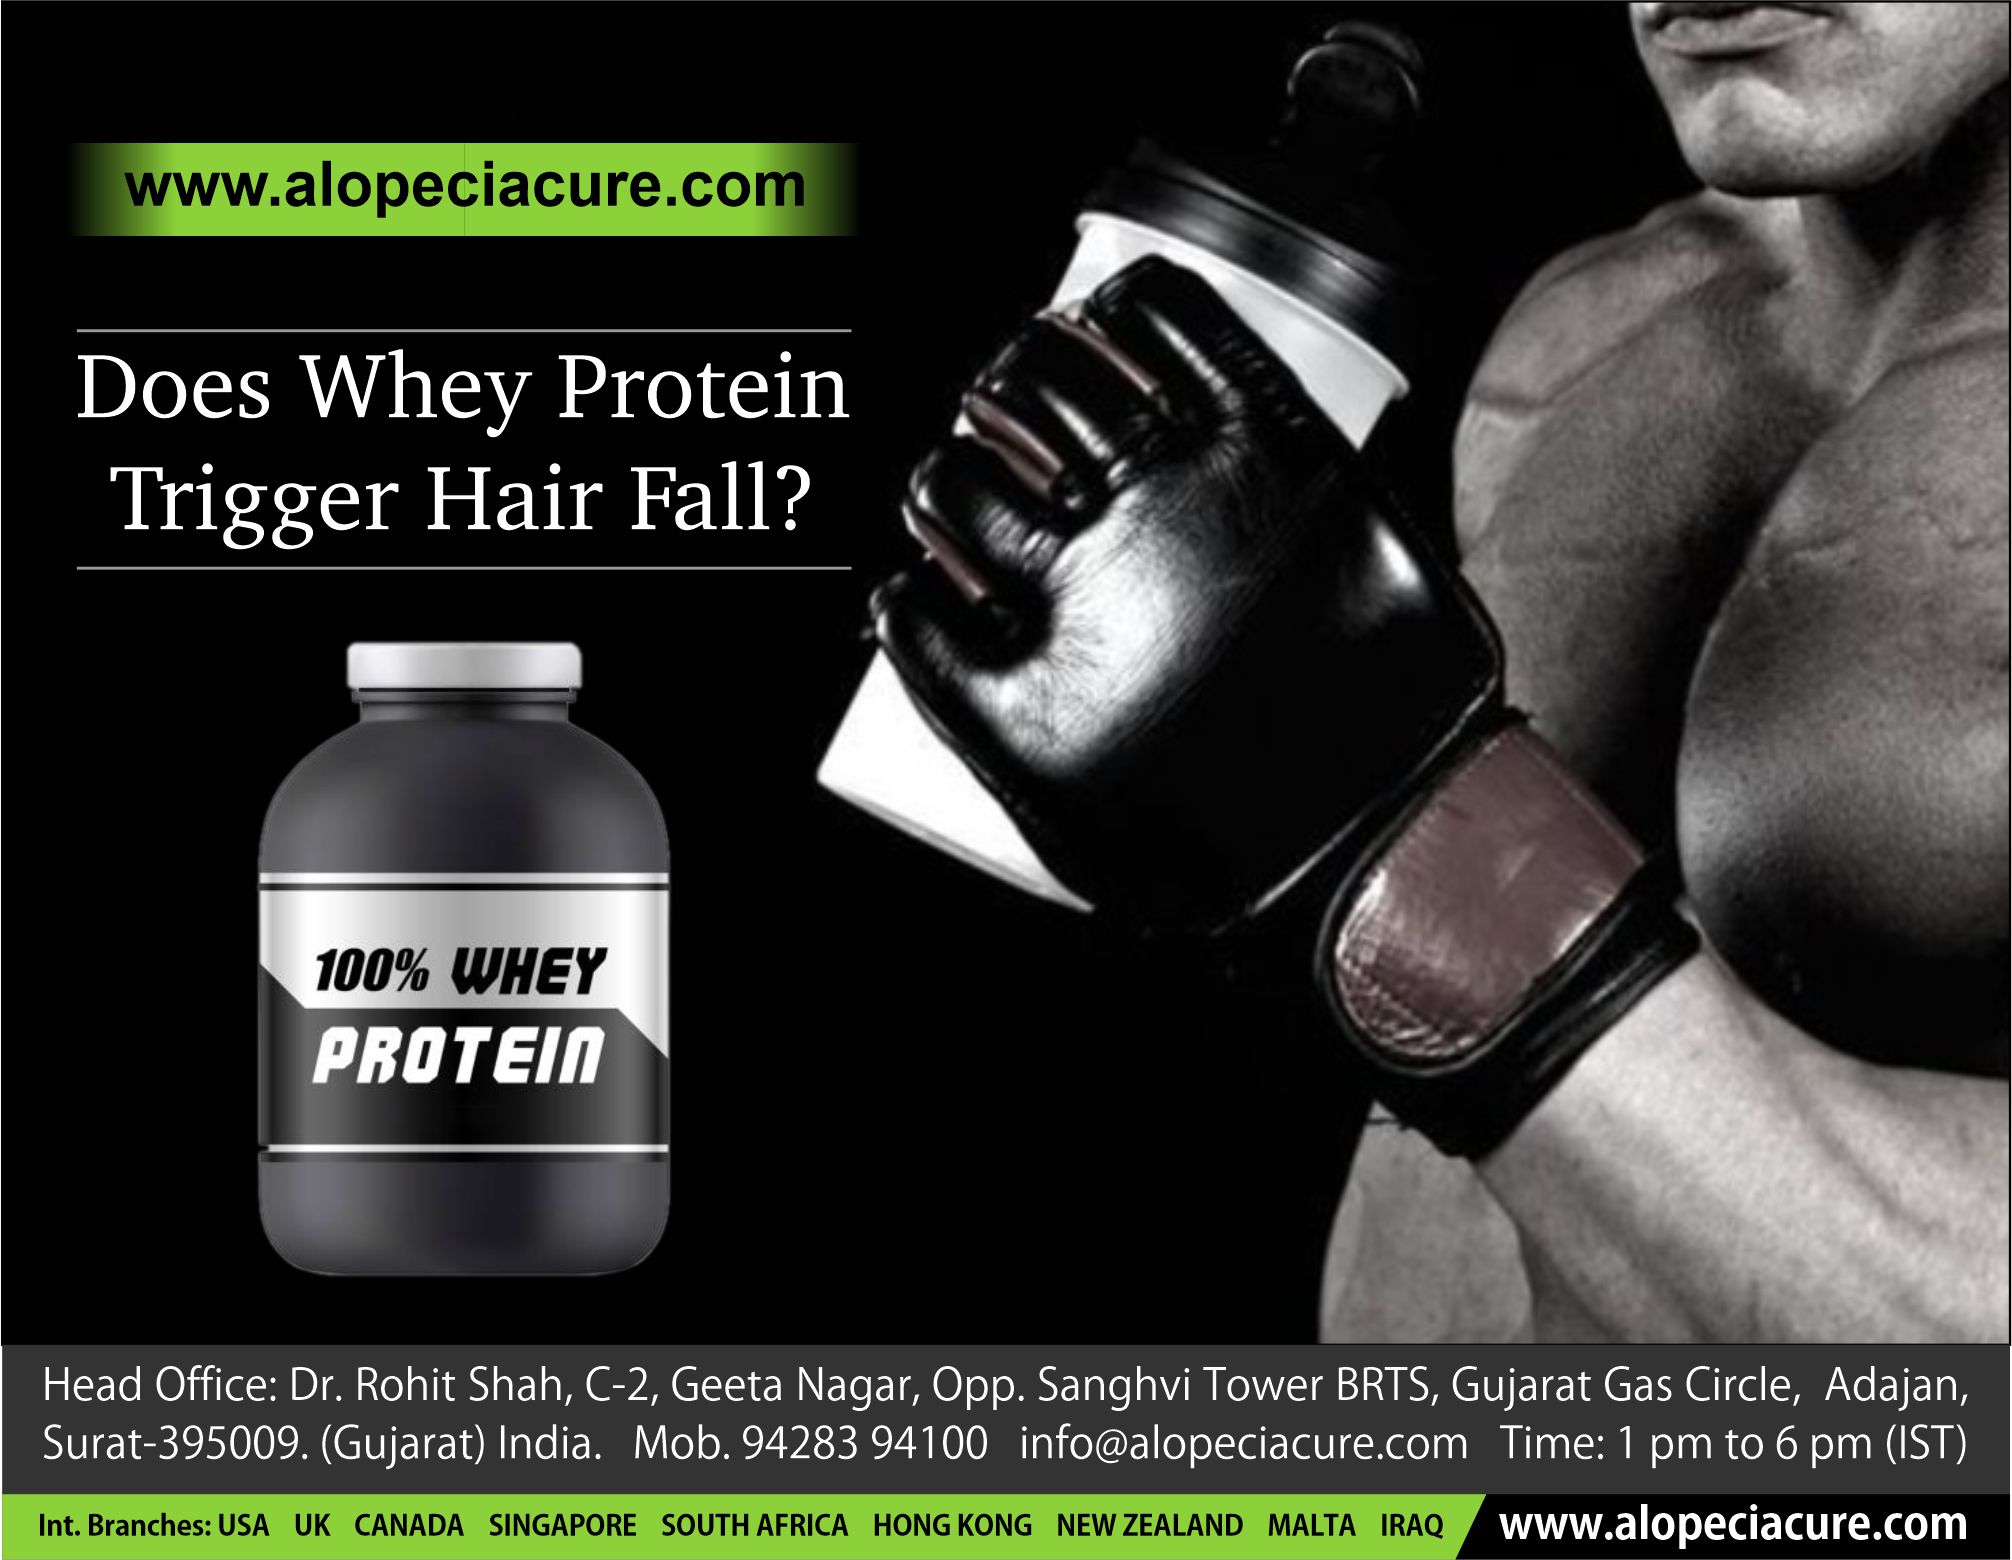 Does Whey Protein Trigger Hair Fall?